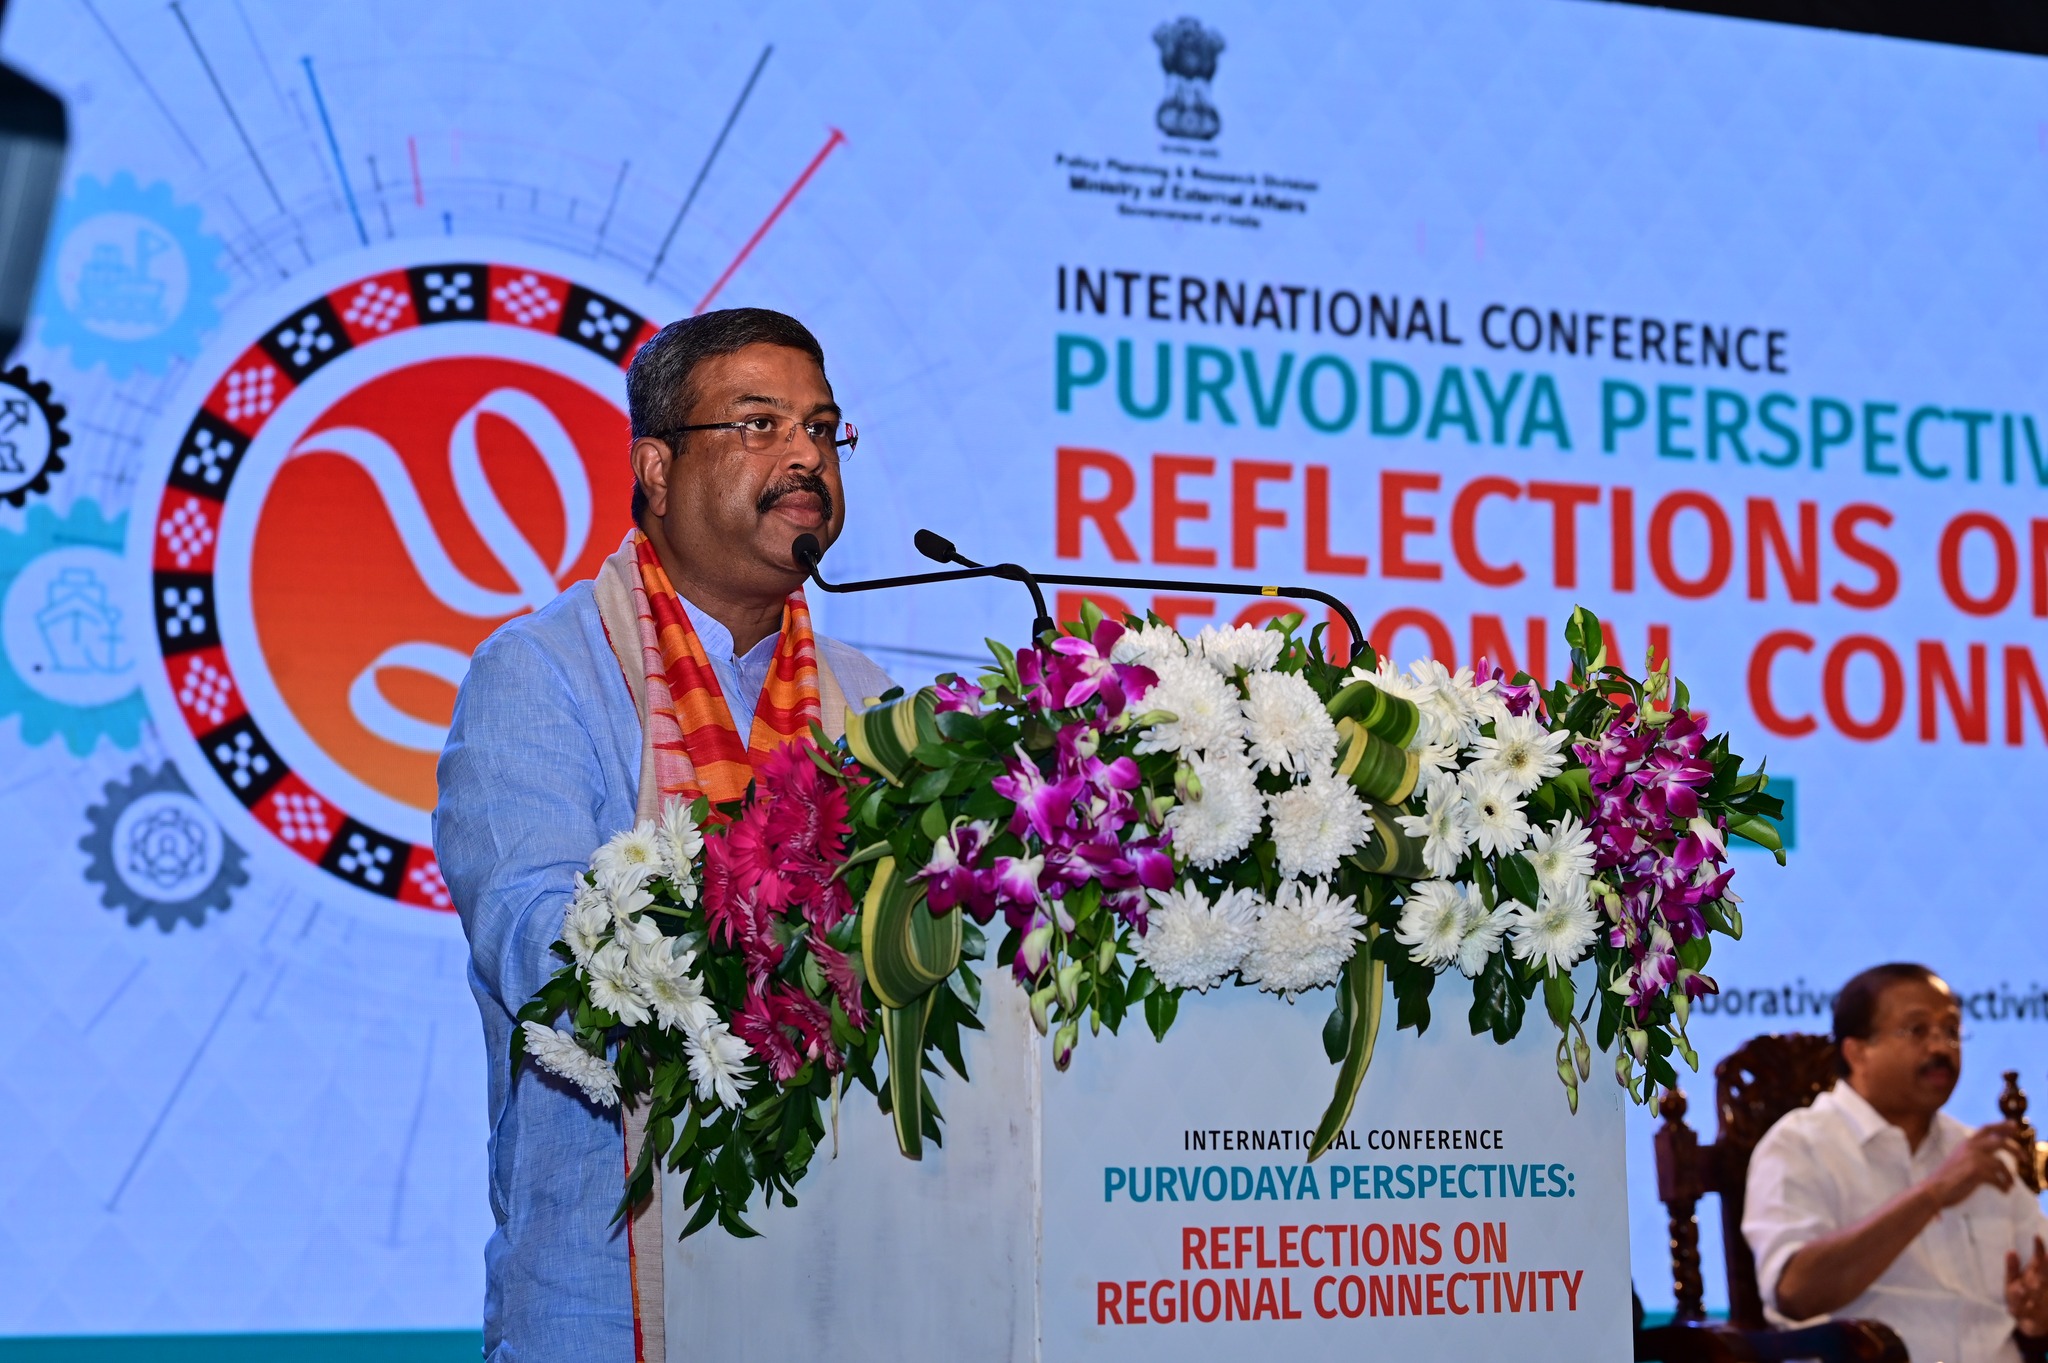 Union Minister Dharmendra Pradhan Graces International Conference 'Purvodaya Perspectives' on Regional Connectivity